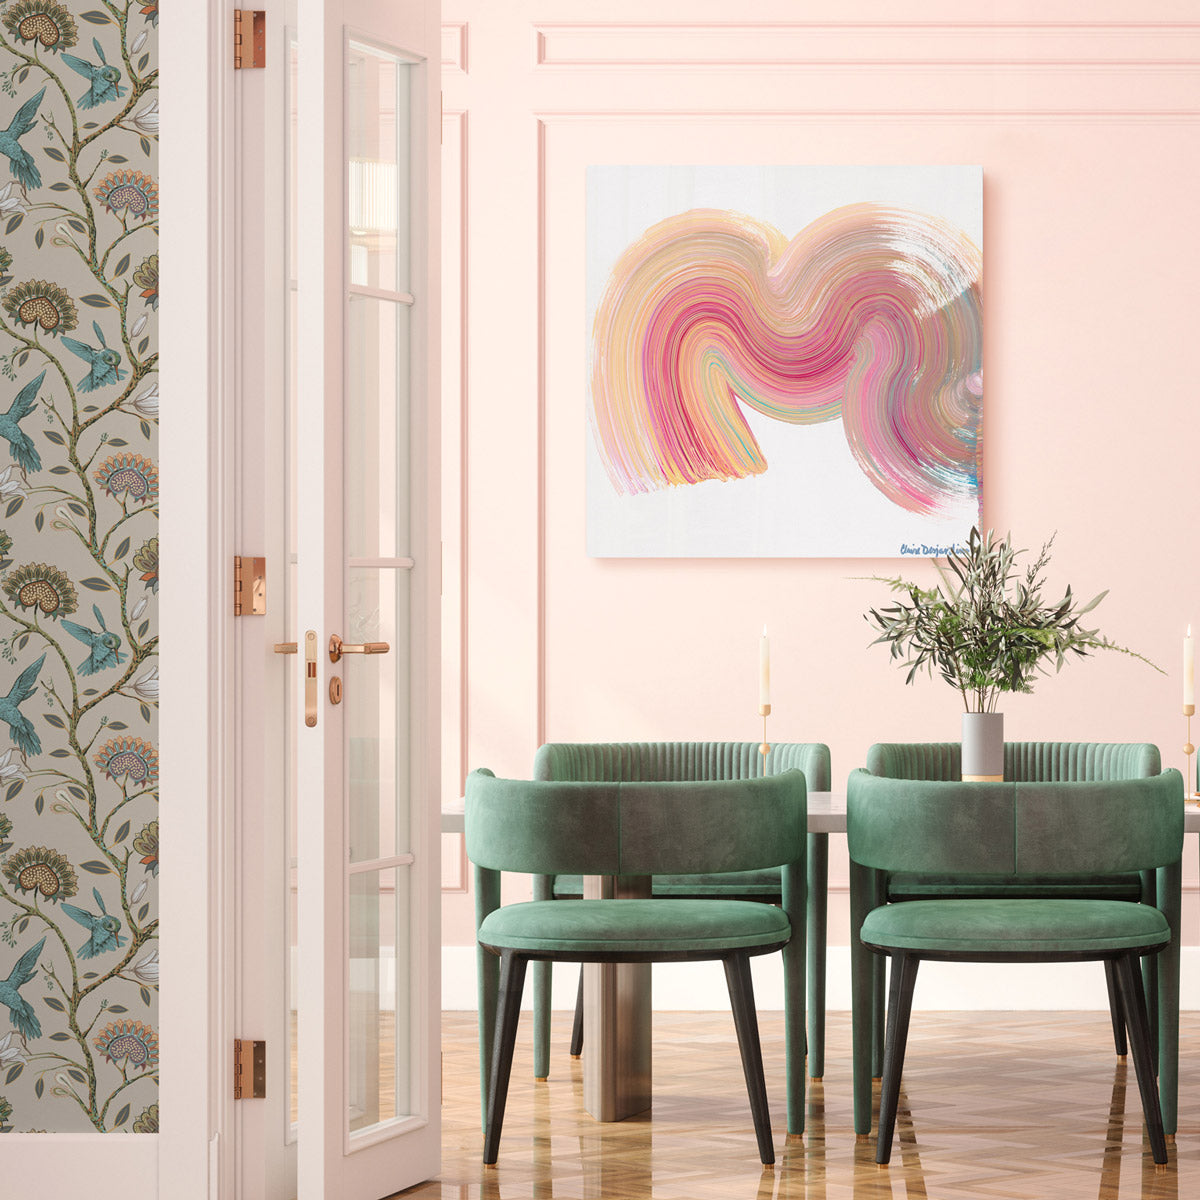 Claire Desjardins' Whoah Mama painting reproduced on HD metal print, hanging on dining room wall